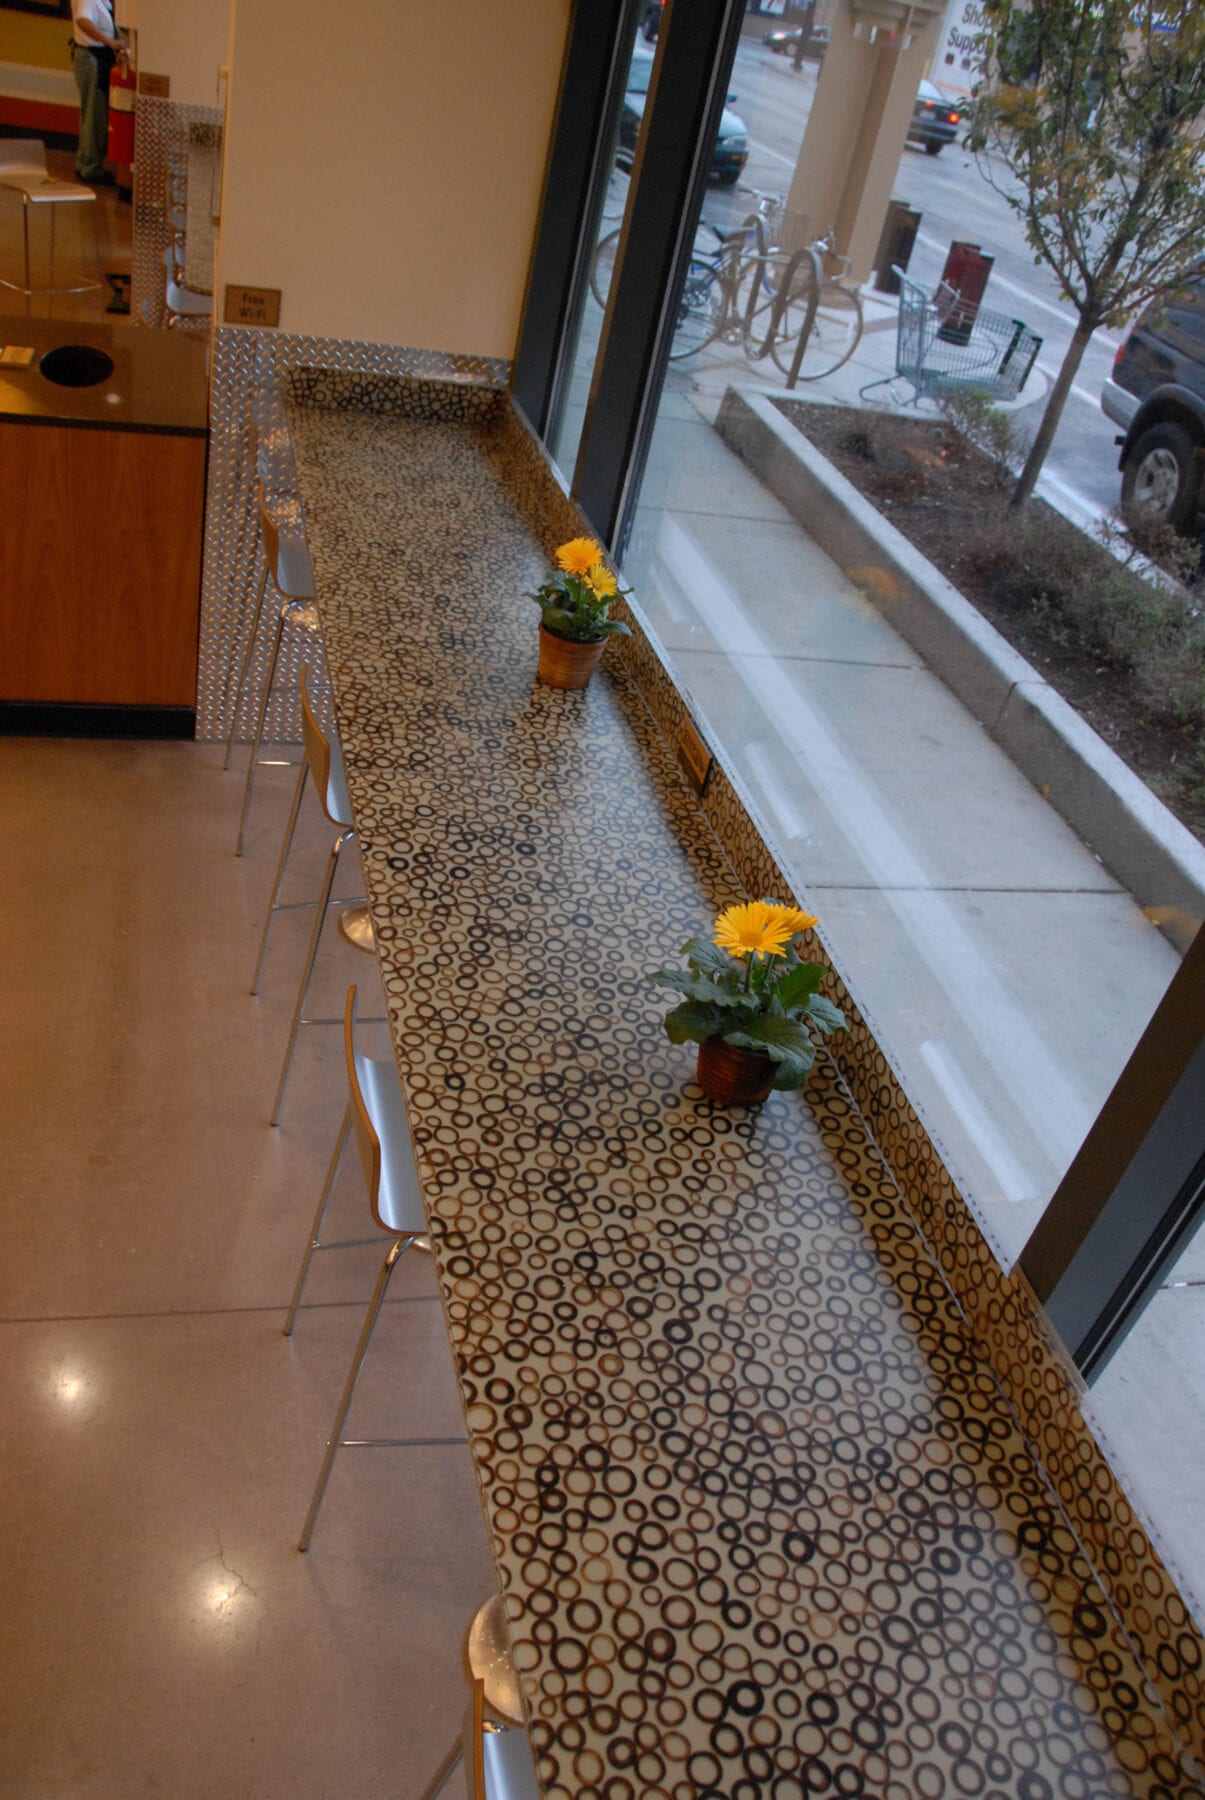 Custom Fabrication of Architectural Glass Countertop from Construction Specialty Projects by Commercial Builder & General Contractor Structural Enterprises